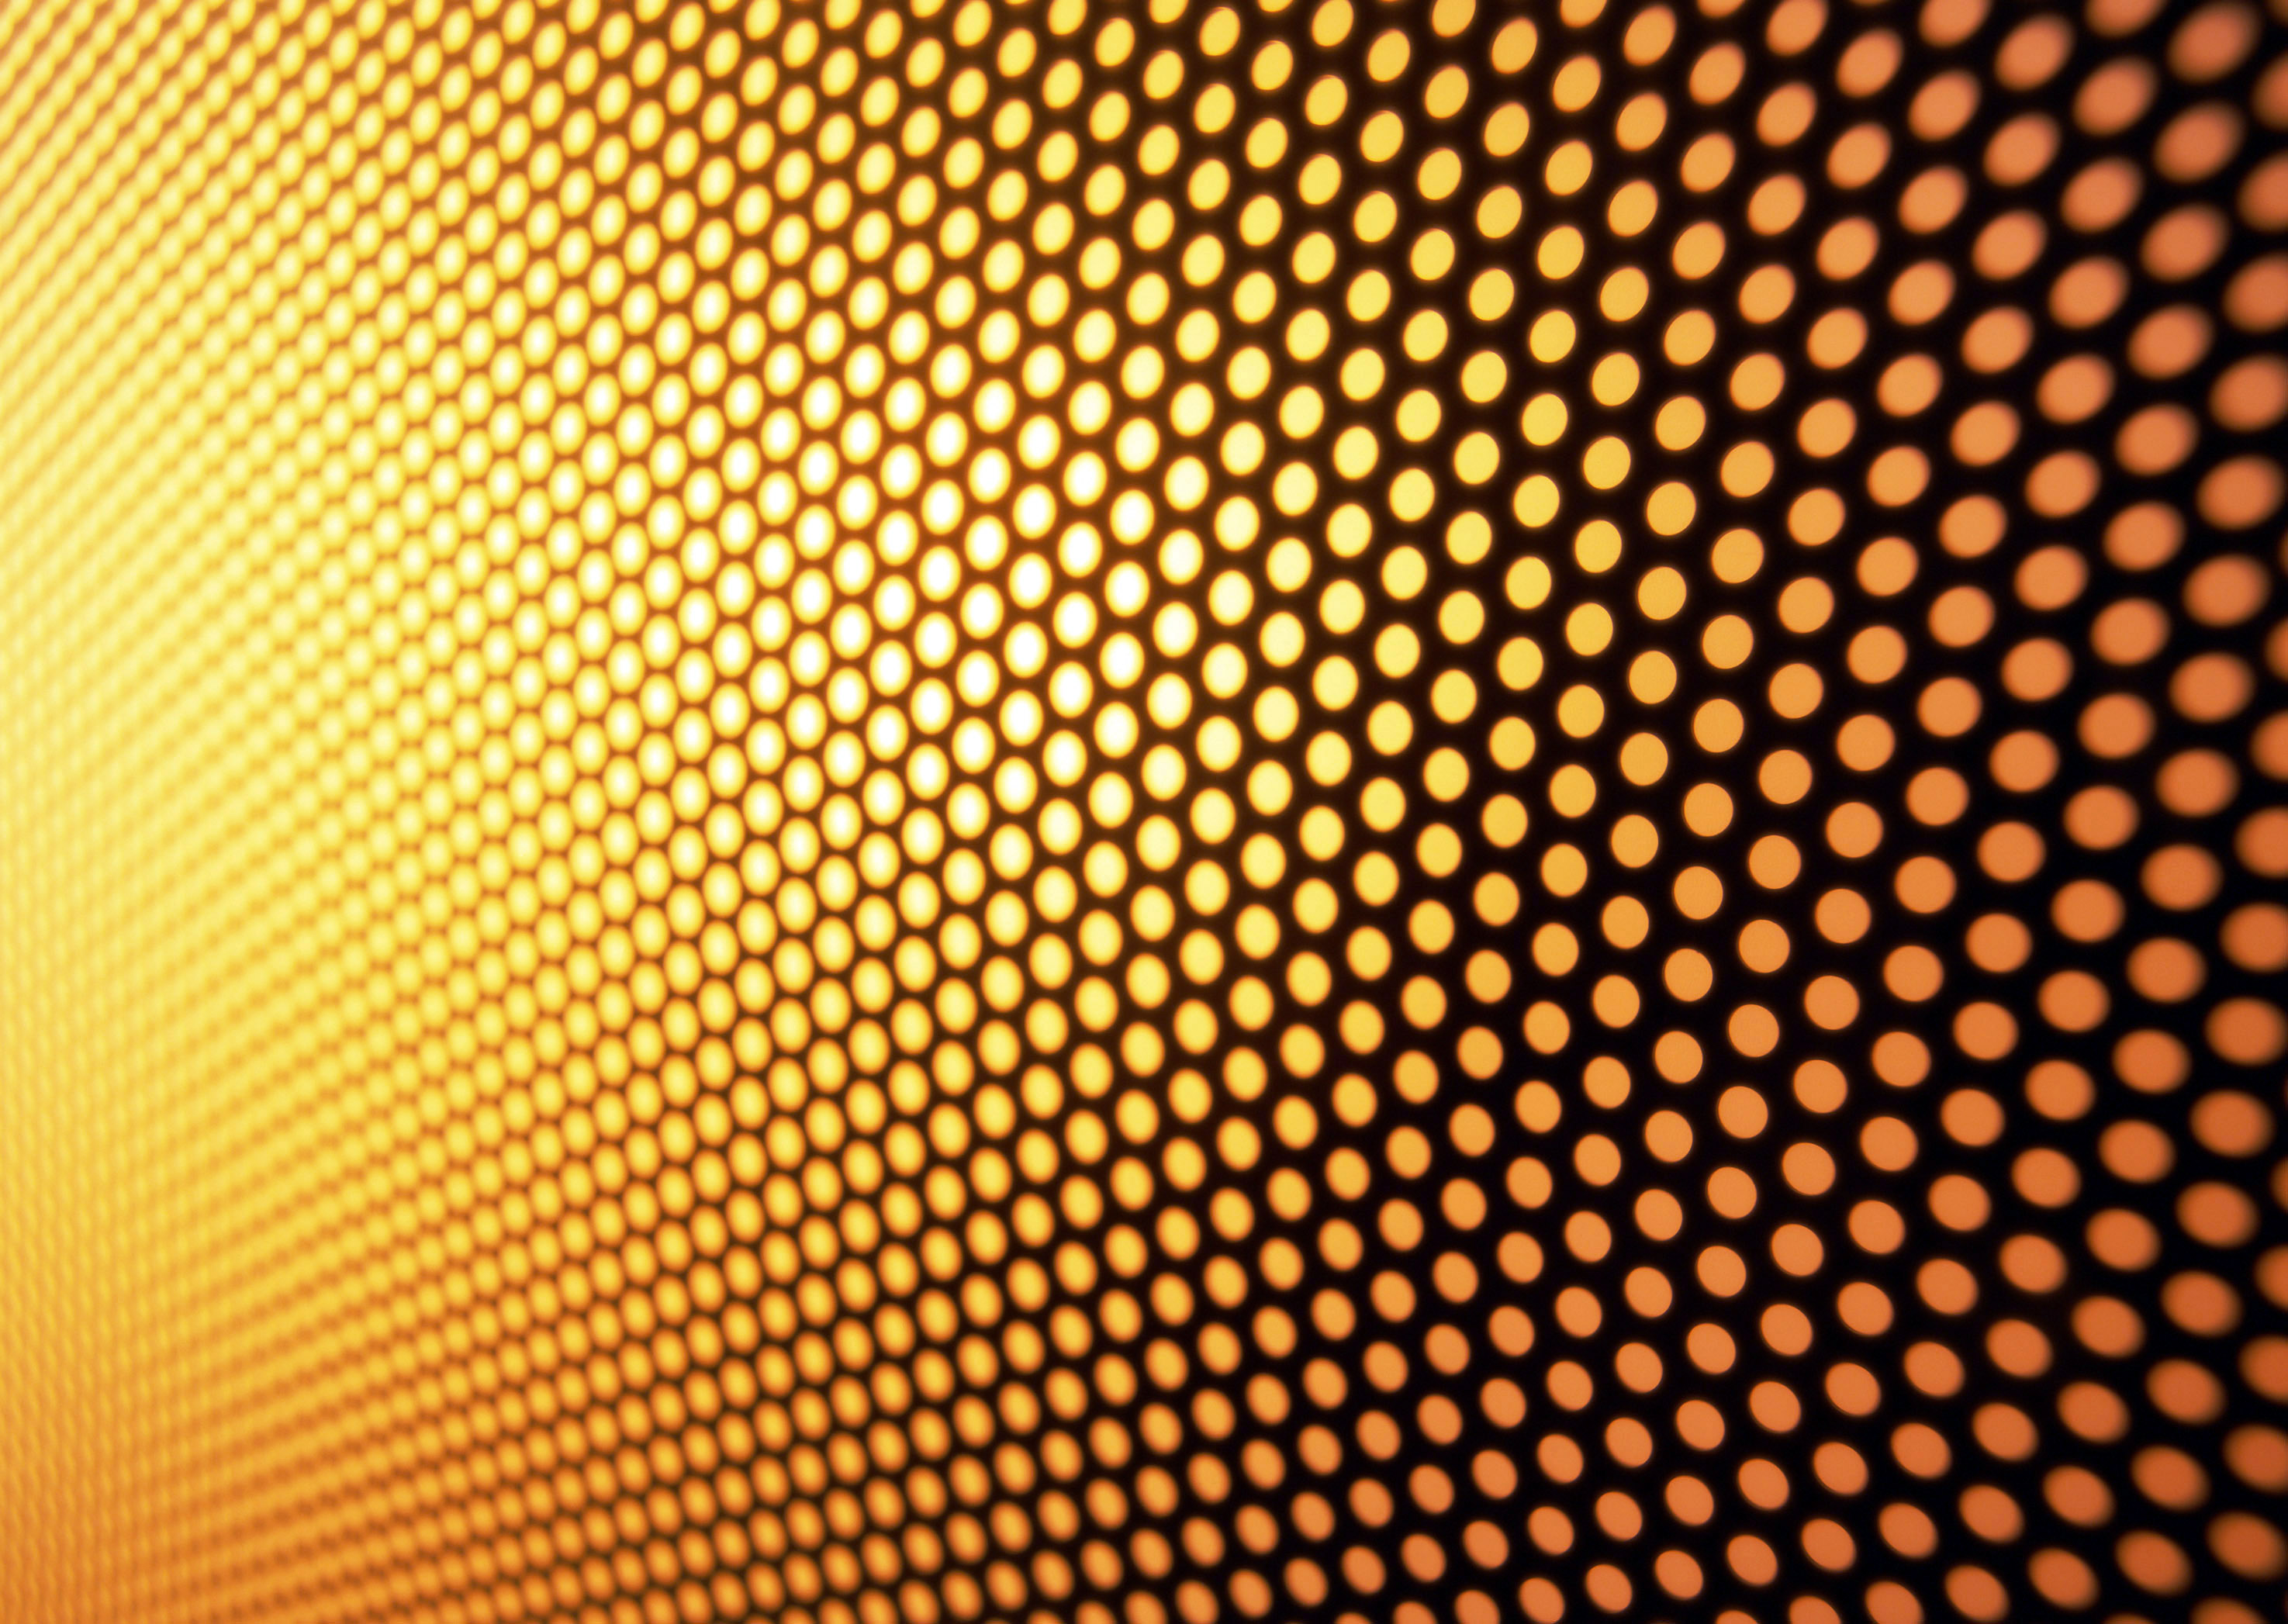 Gold And Black Background Design Hd - 2950x2094 Wallpaper 